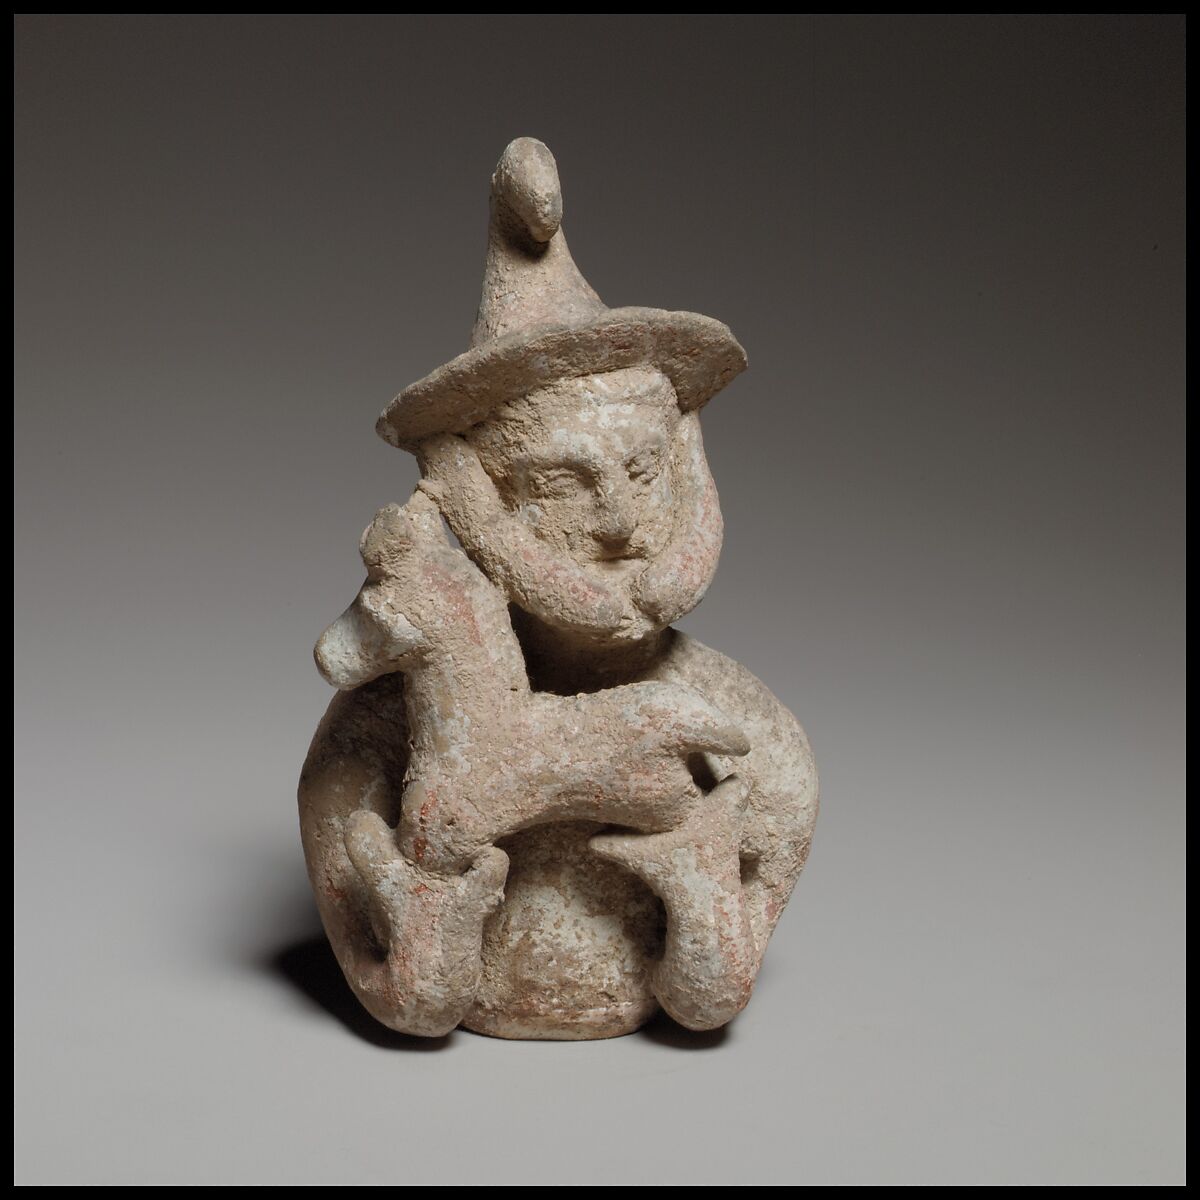 Terracotta statuette of a male votary offering a kid, Terracotta, Cypriot 